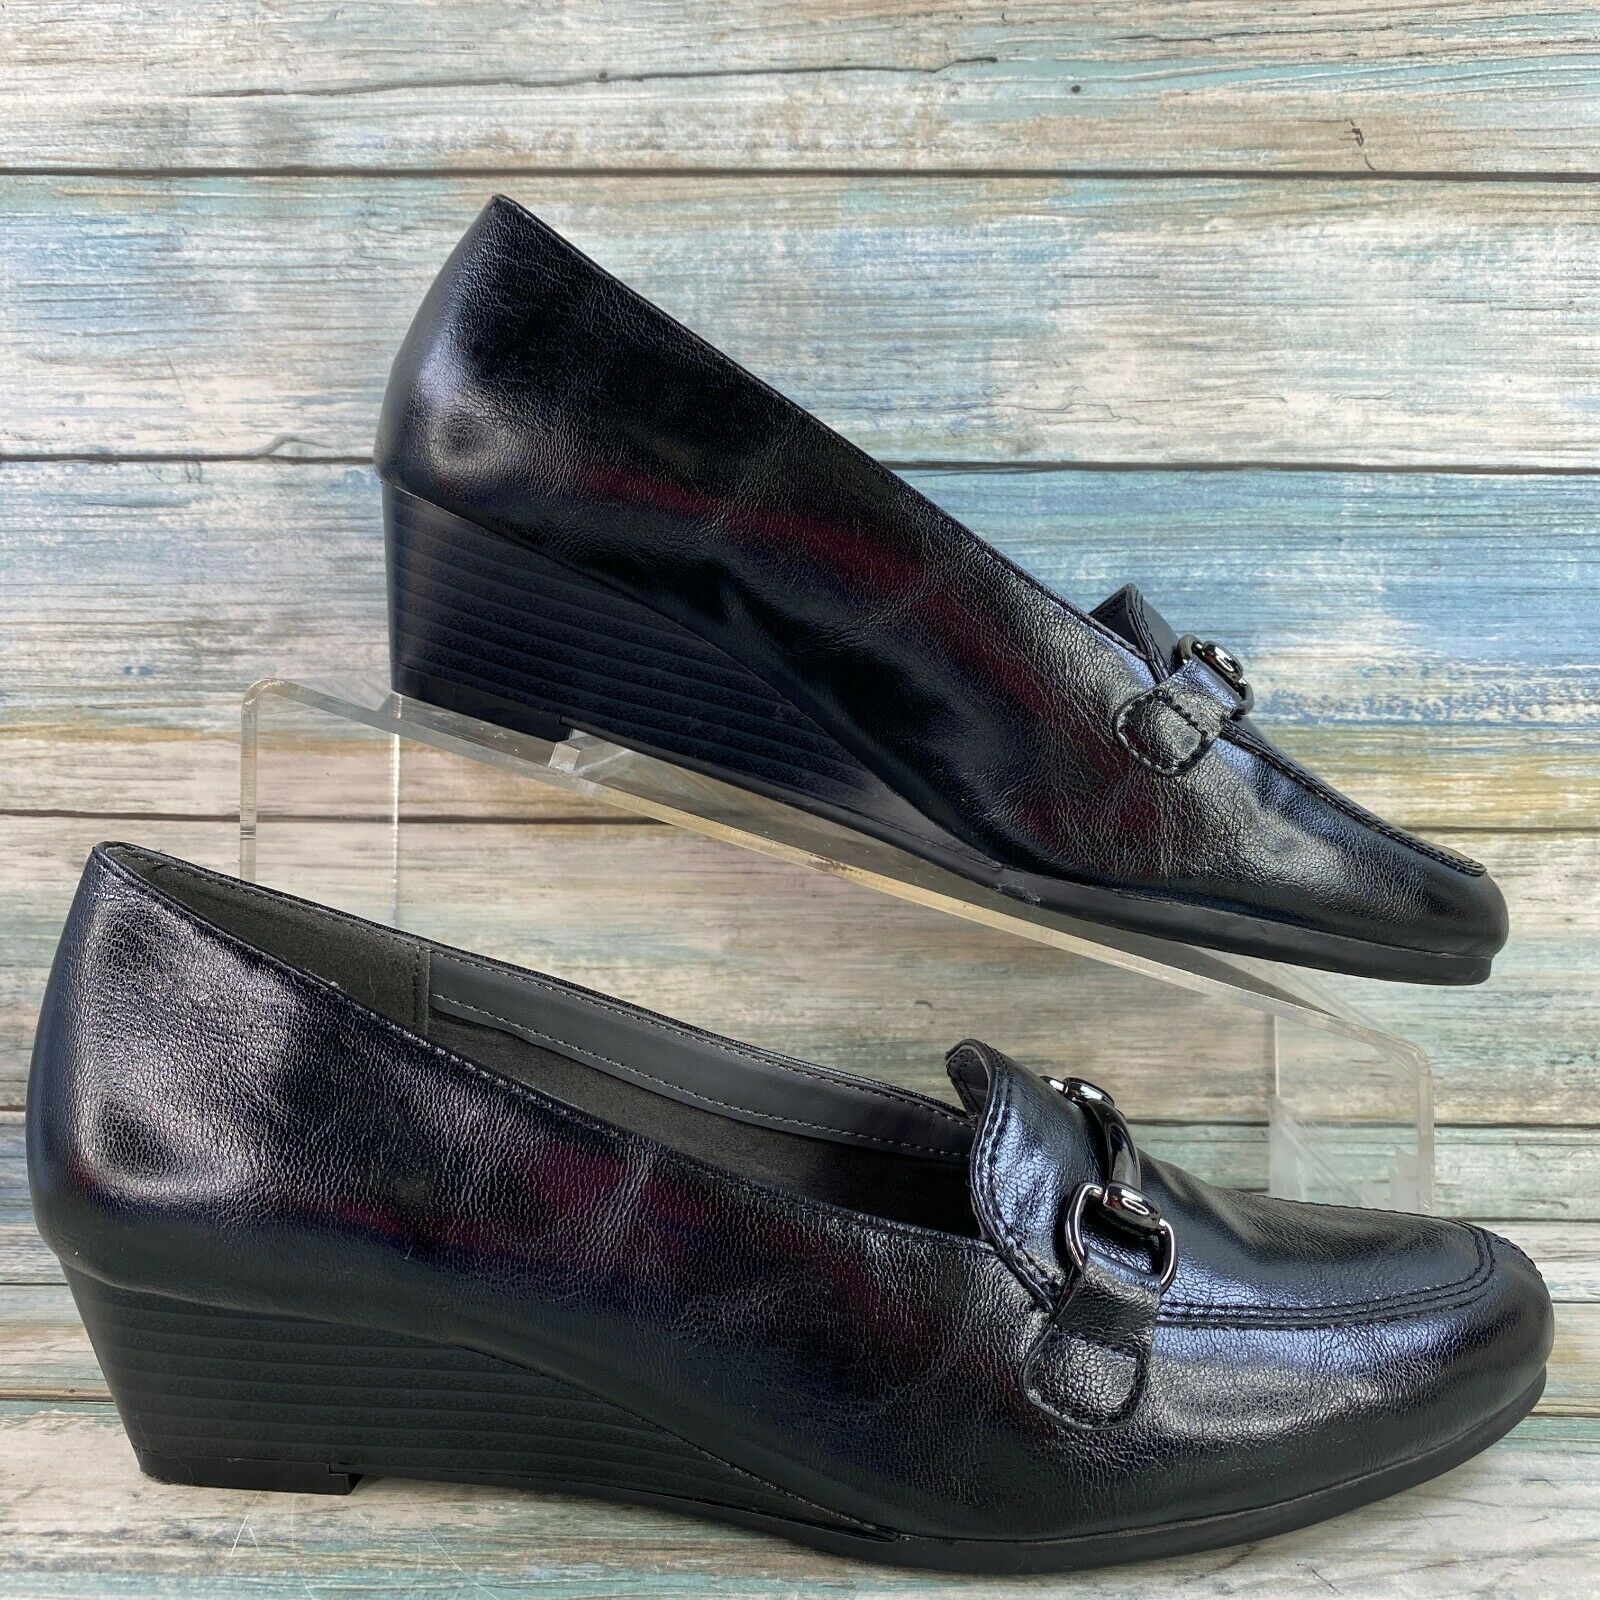 Aerosoles Love Spell Womens Wedge Heel Loafers Shoes Black Faux Leather Size 8.5